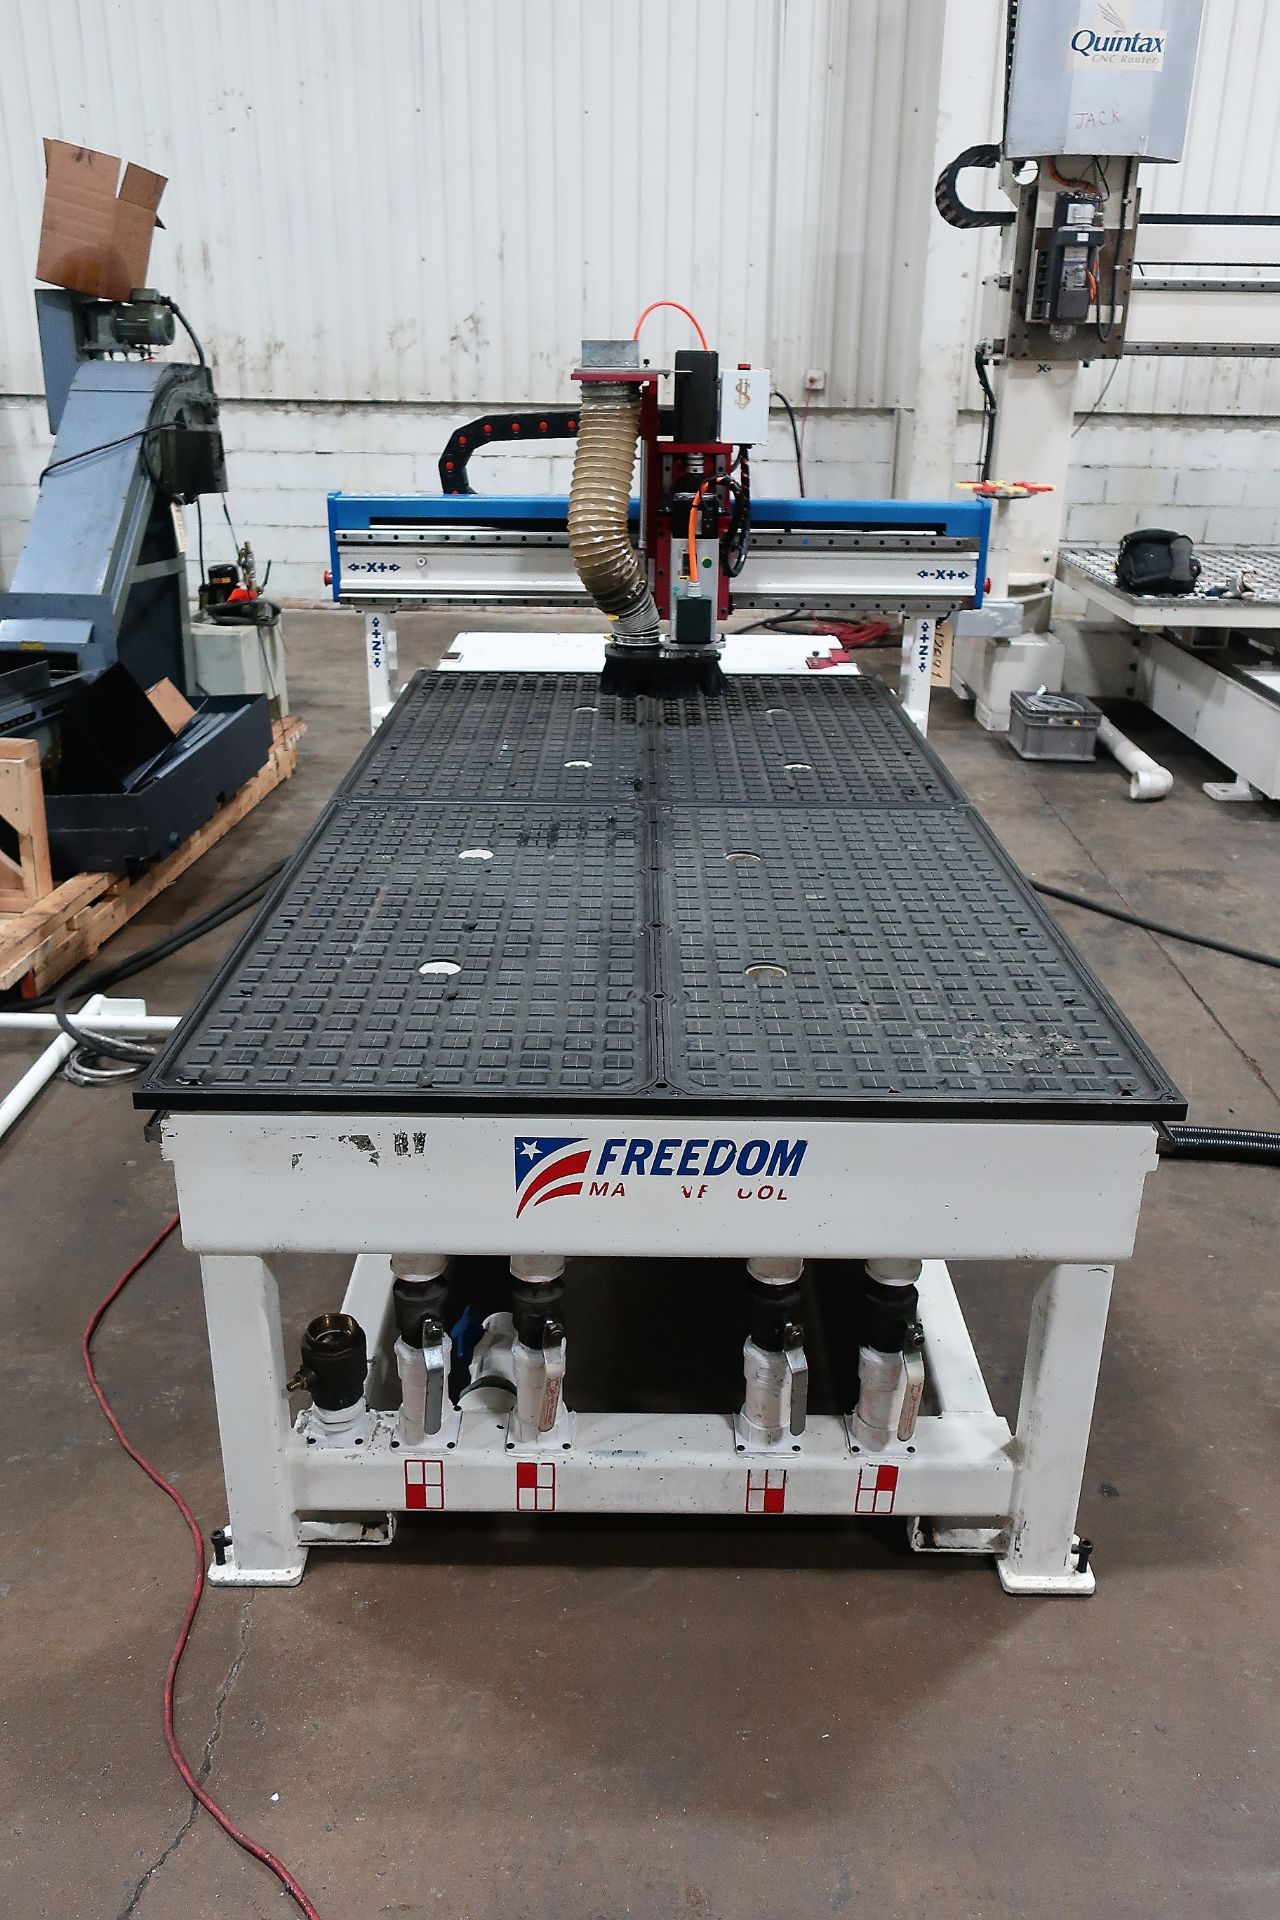 4'X8' DMS FMT MODEL F37-4-8-7-CLV CNC ROUTER, S/N 4260, NEW 2016 - Image 2 of 10